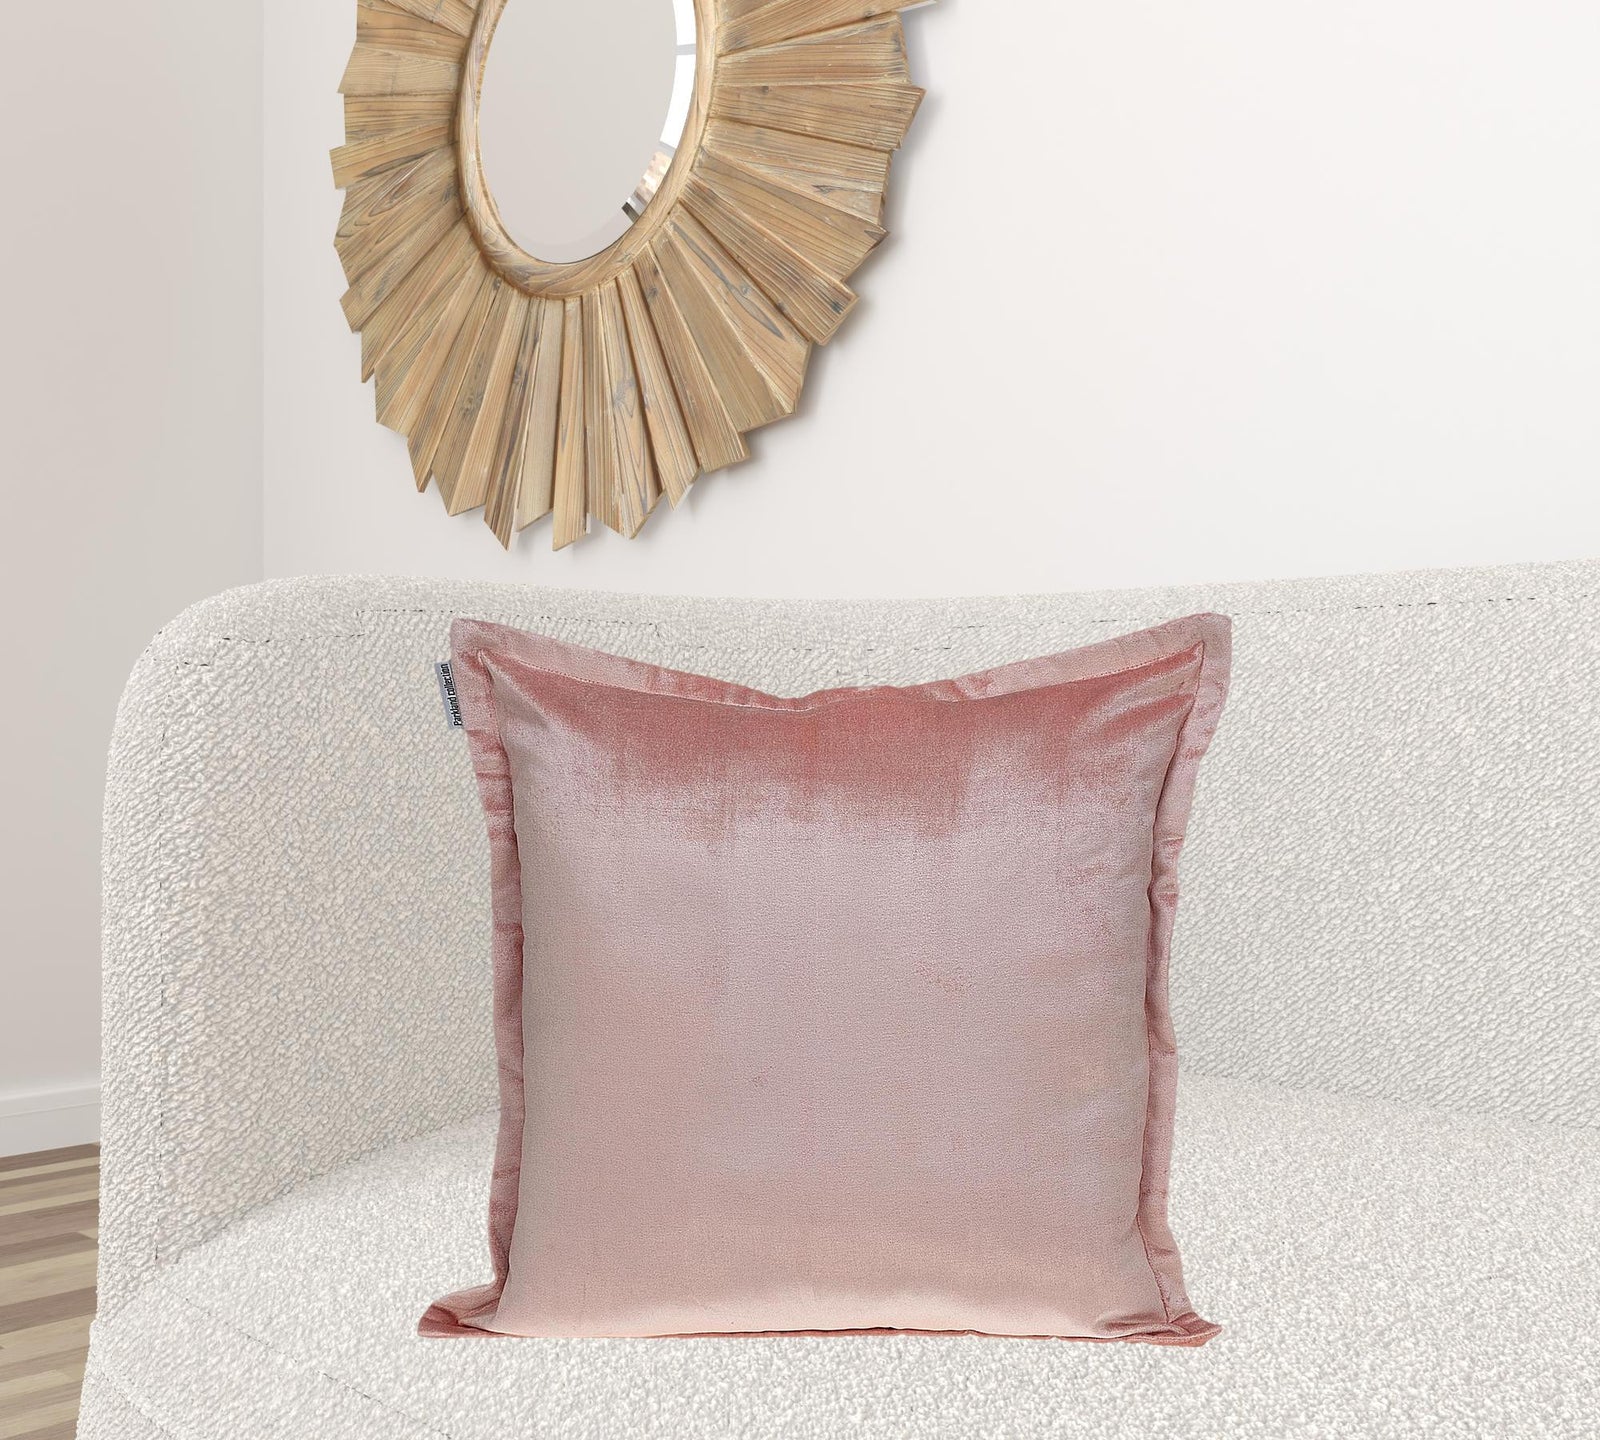 Premier 24" Soft Touch Metallic Pink Solid Color Accent Pillow